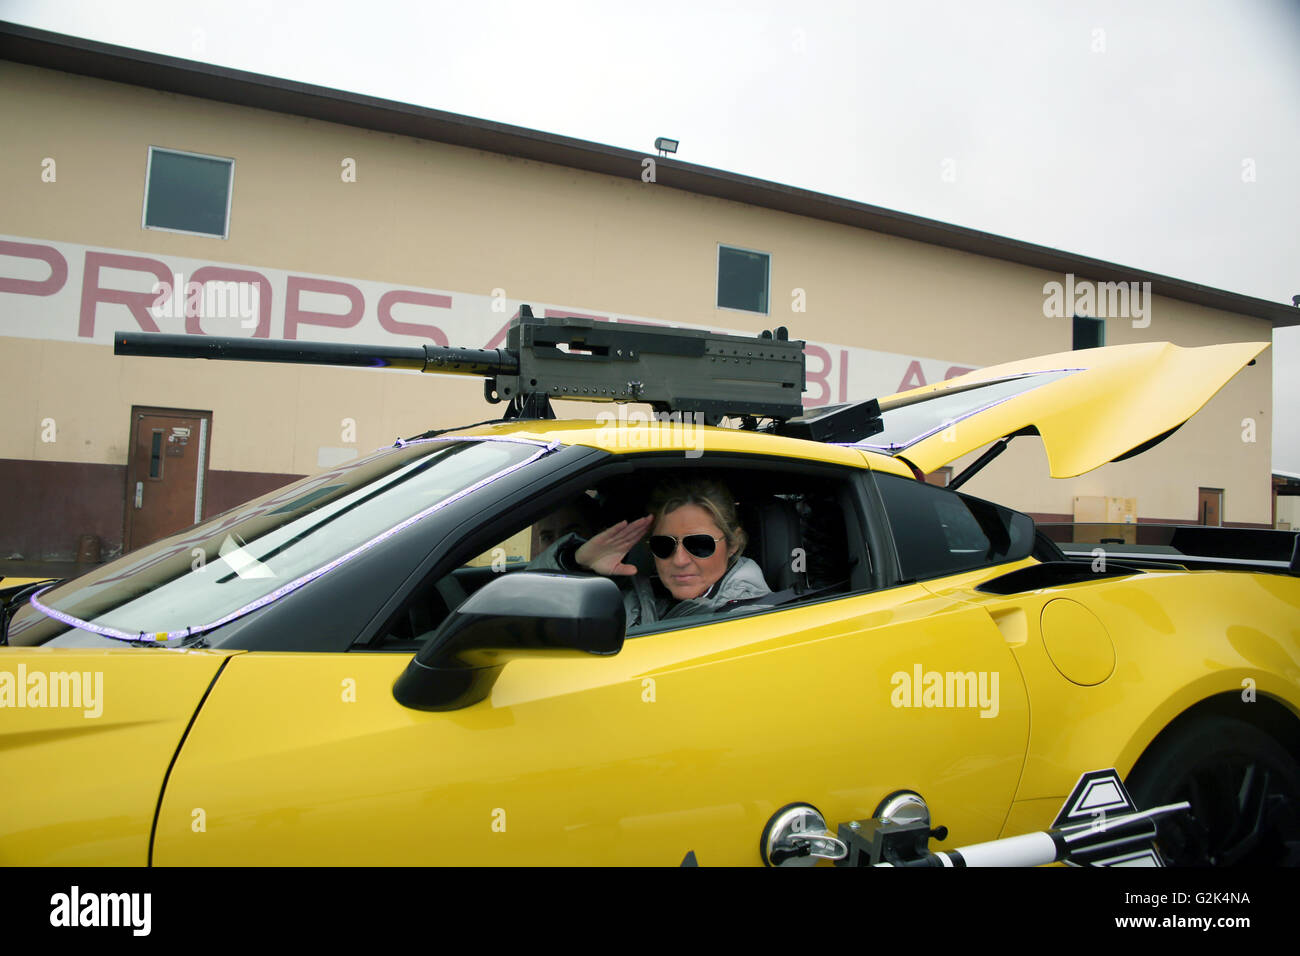 Professional race driver and host of the BBC television show Top Gear Sabine Schmitz, salutes the camera from inside a car rigged with prop weapons during a Top Gear special filmed at Naval Air Station Fallon January 10, 2016 in Fallon, Nevada. Naval Air Station Fallon is where the Navy Top Gun fighter pilots train. Stock Photo